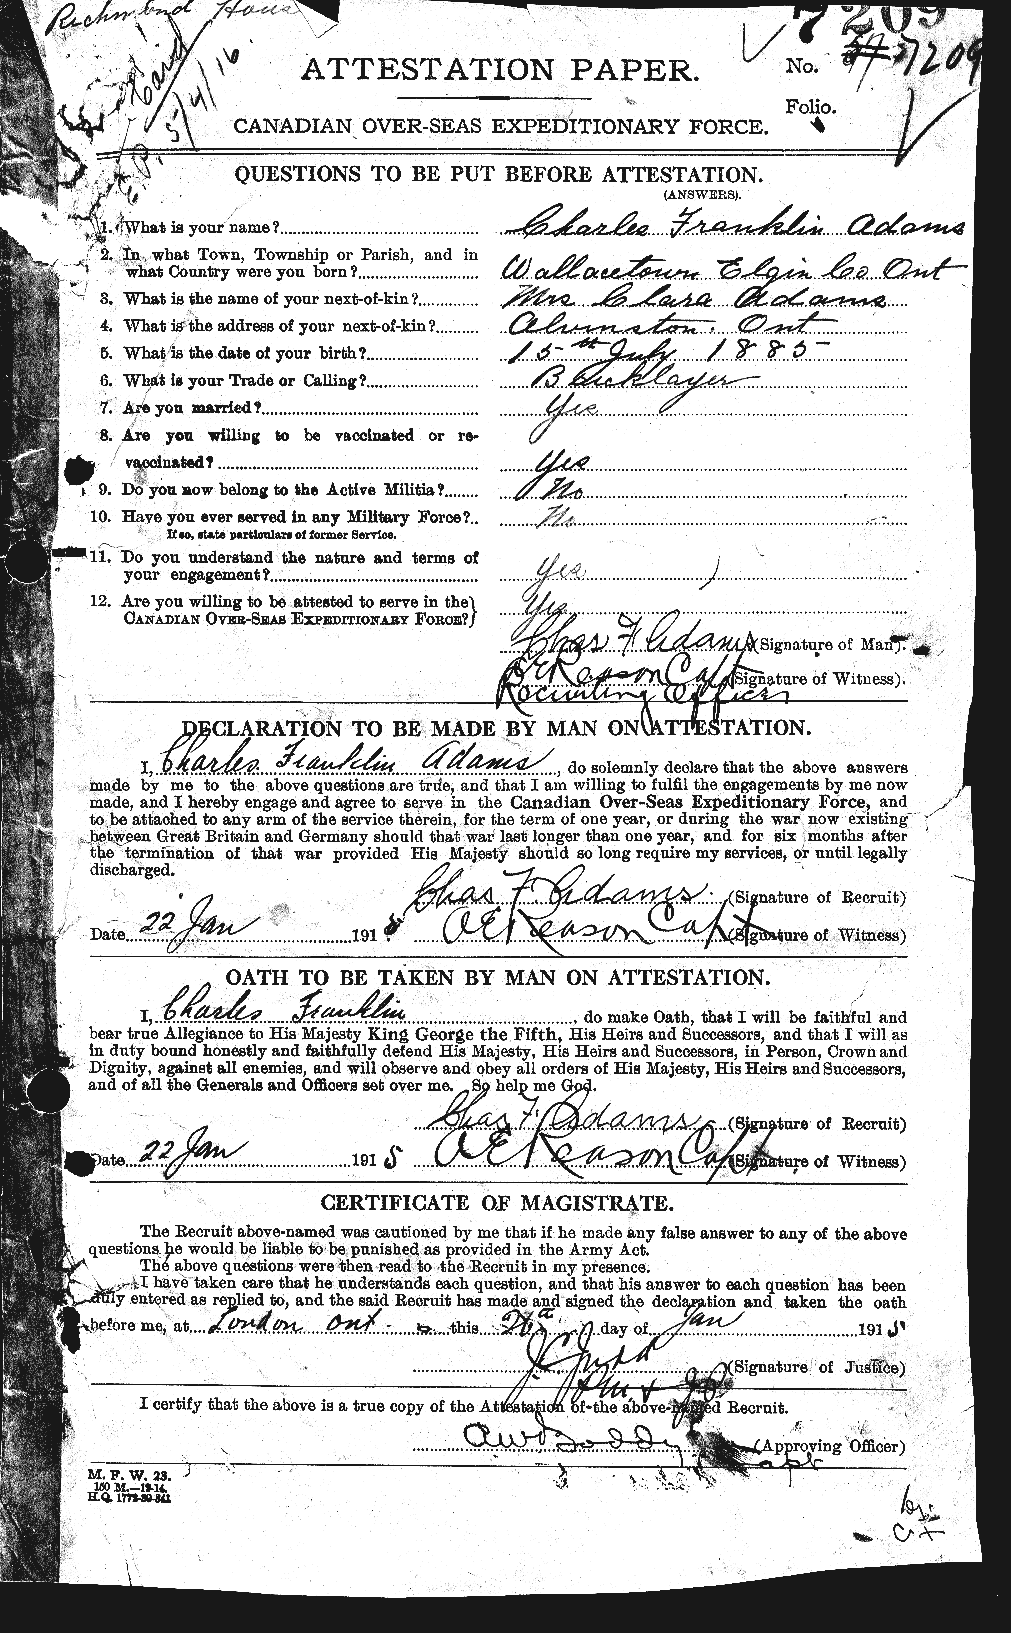 Personnel Records of the First World War - CEF 202068a